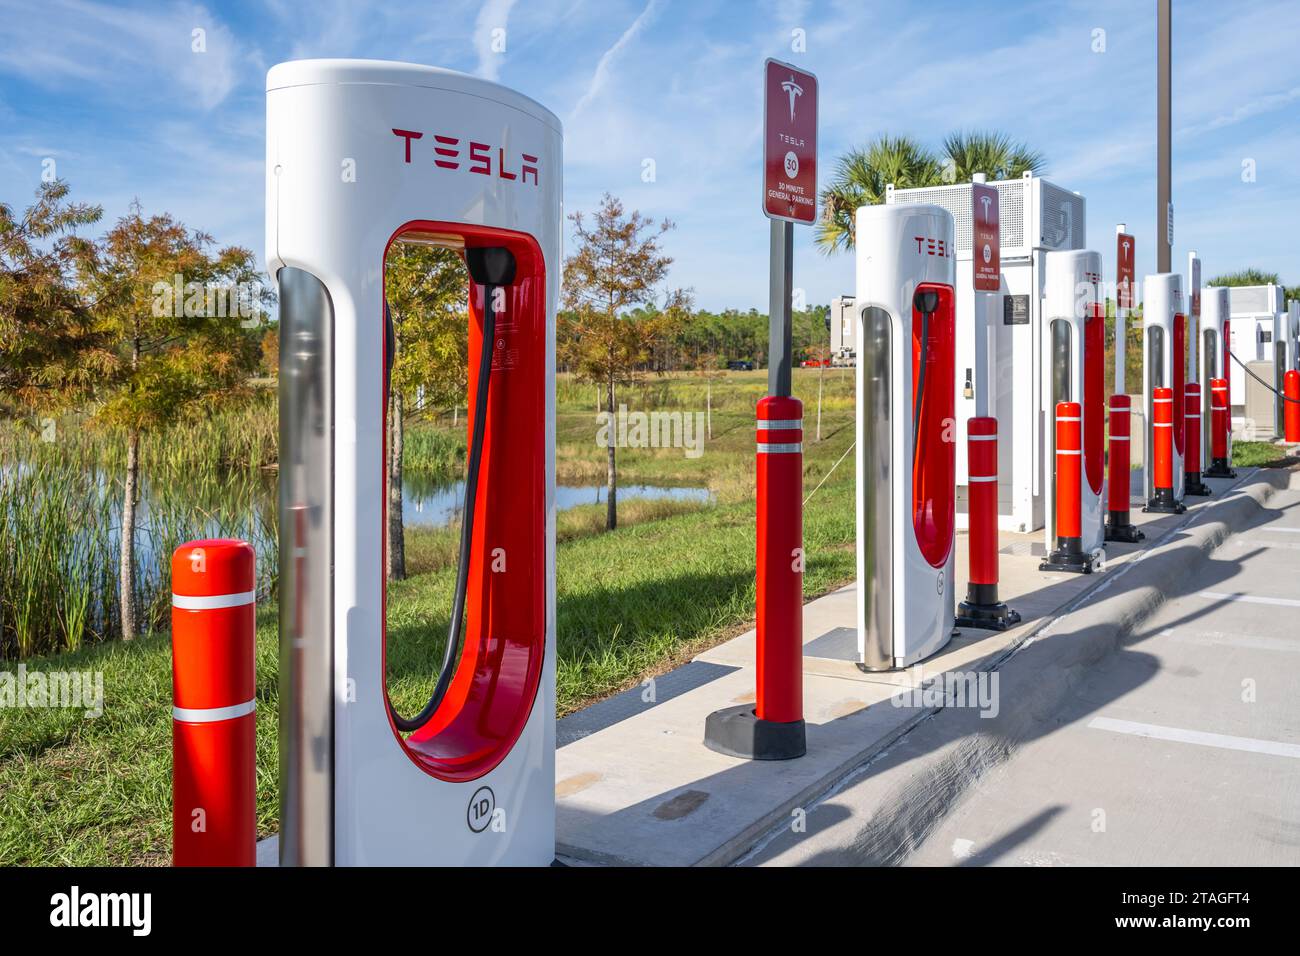 Tesla EV Superchargers at the Buc-ees travel center fueling station along I-95 in Daytona Beach, Florida. (USA) Stock Photo